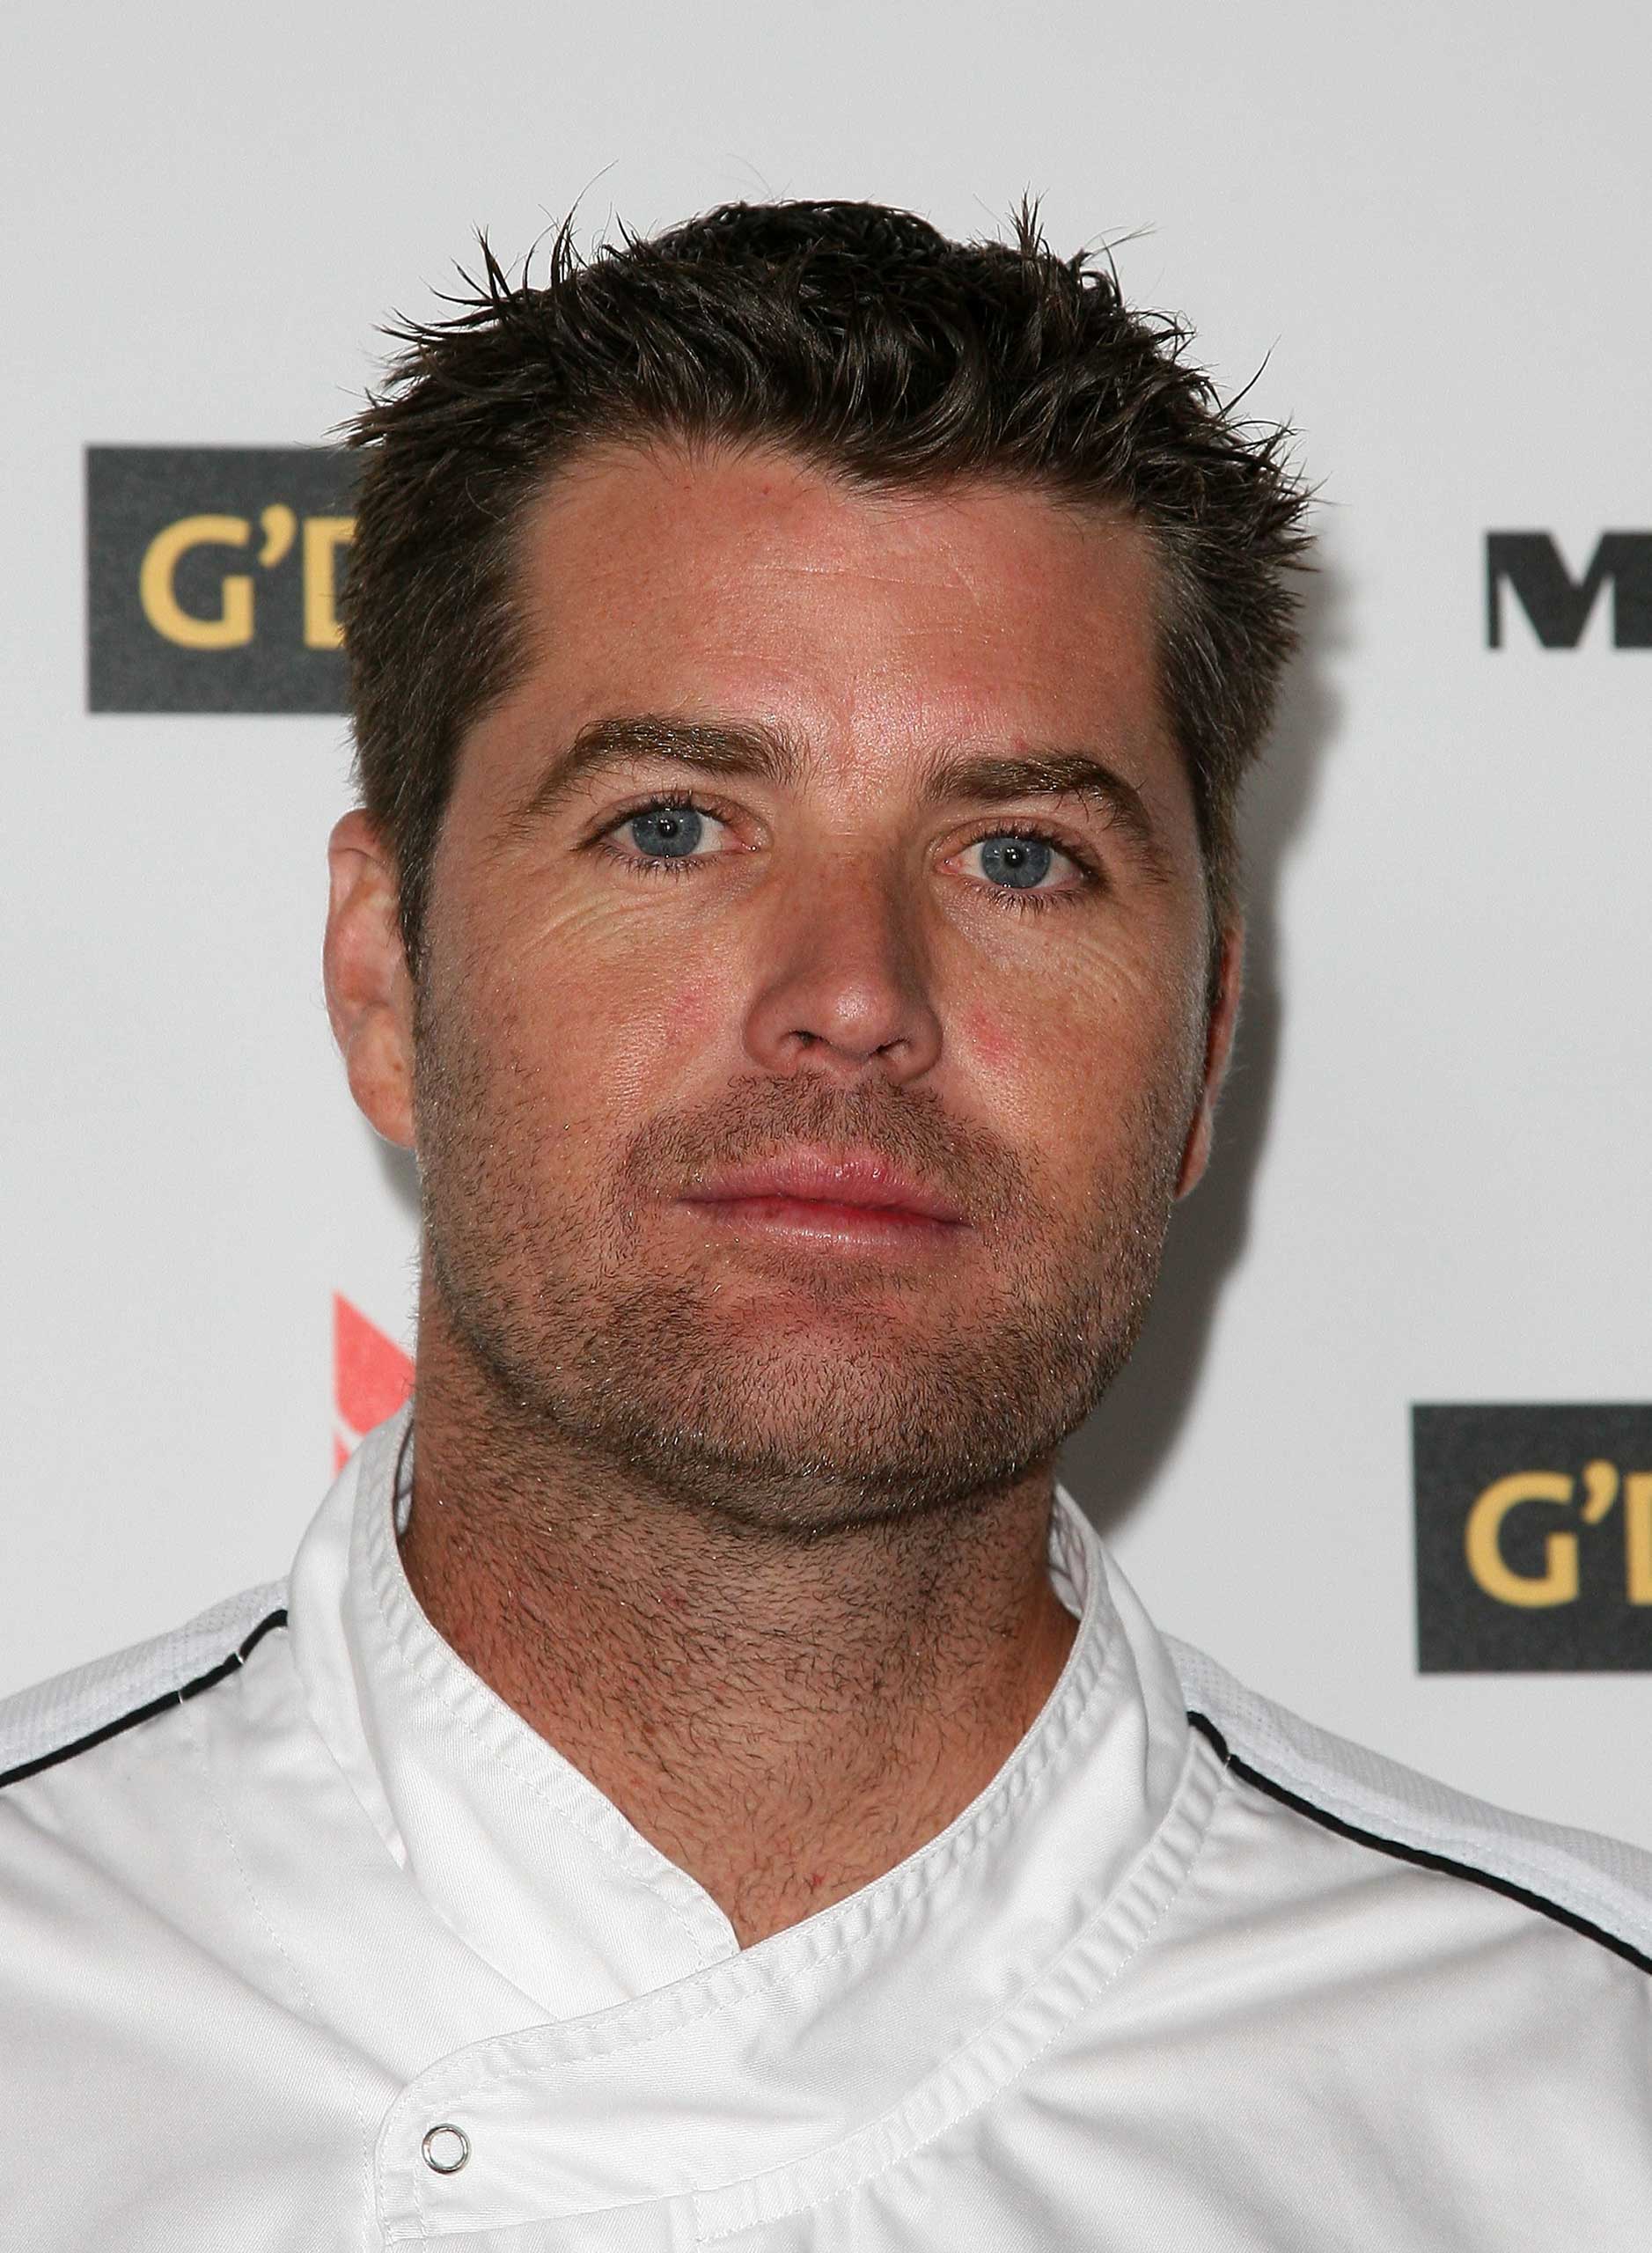 Chef Pete Evans in Los Angeles in 2010. (Valerie Macon—Getty Images)